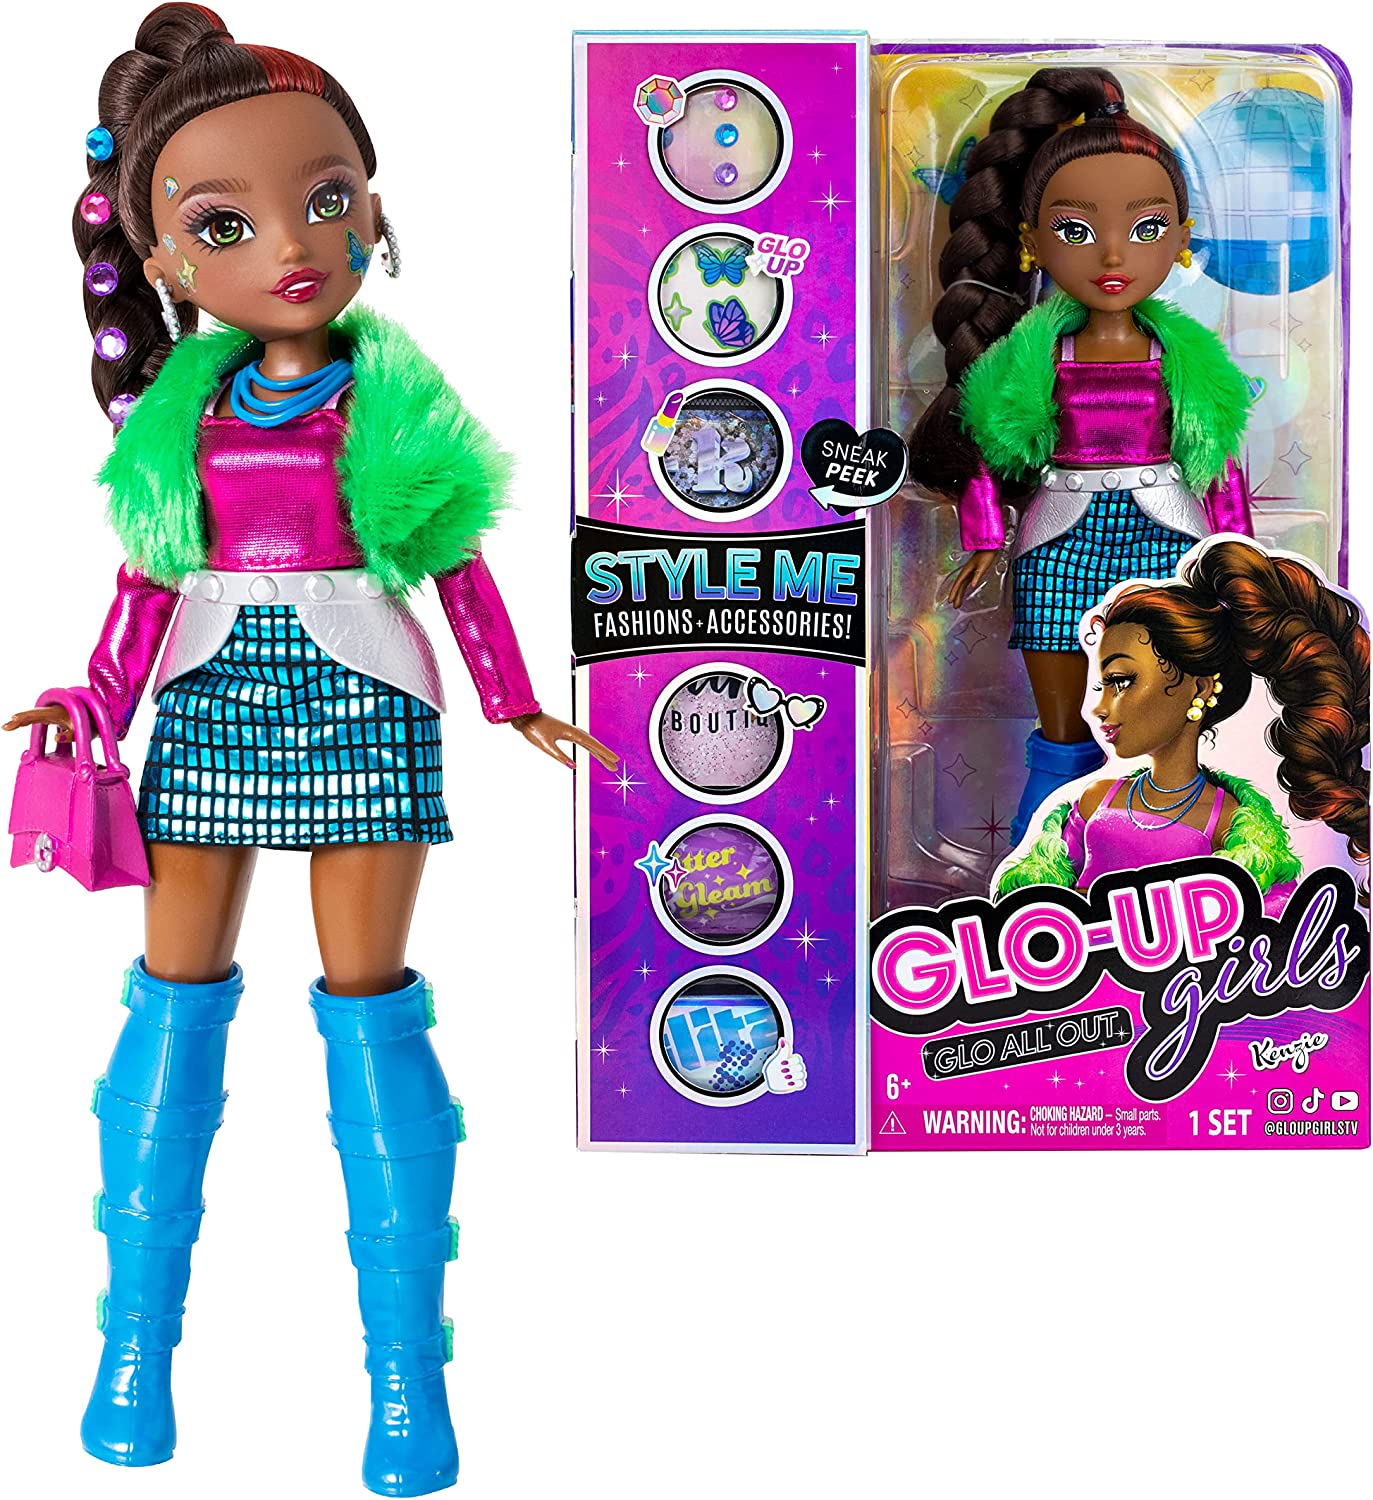 New Glo-up Girls series 2 dolls 2022 - YouLoveIt.com